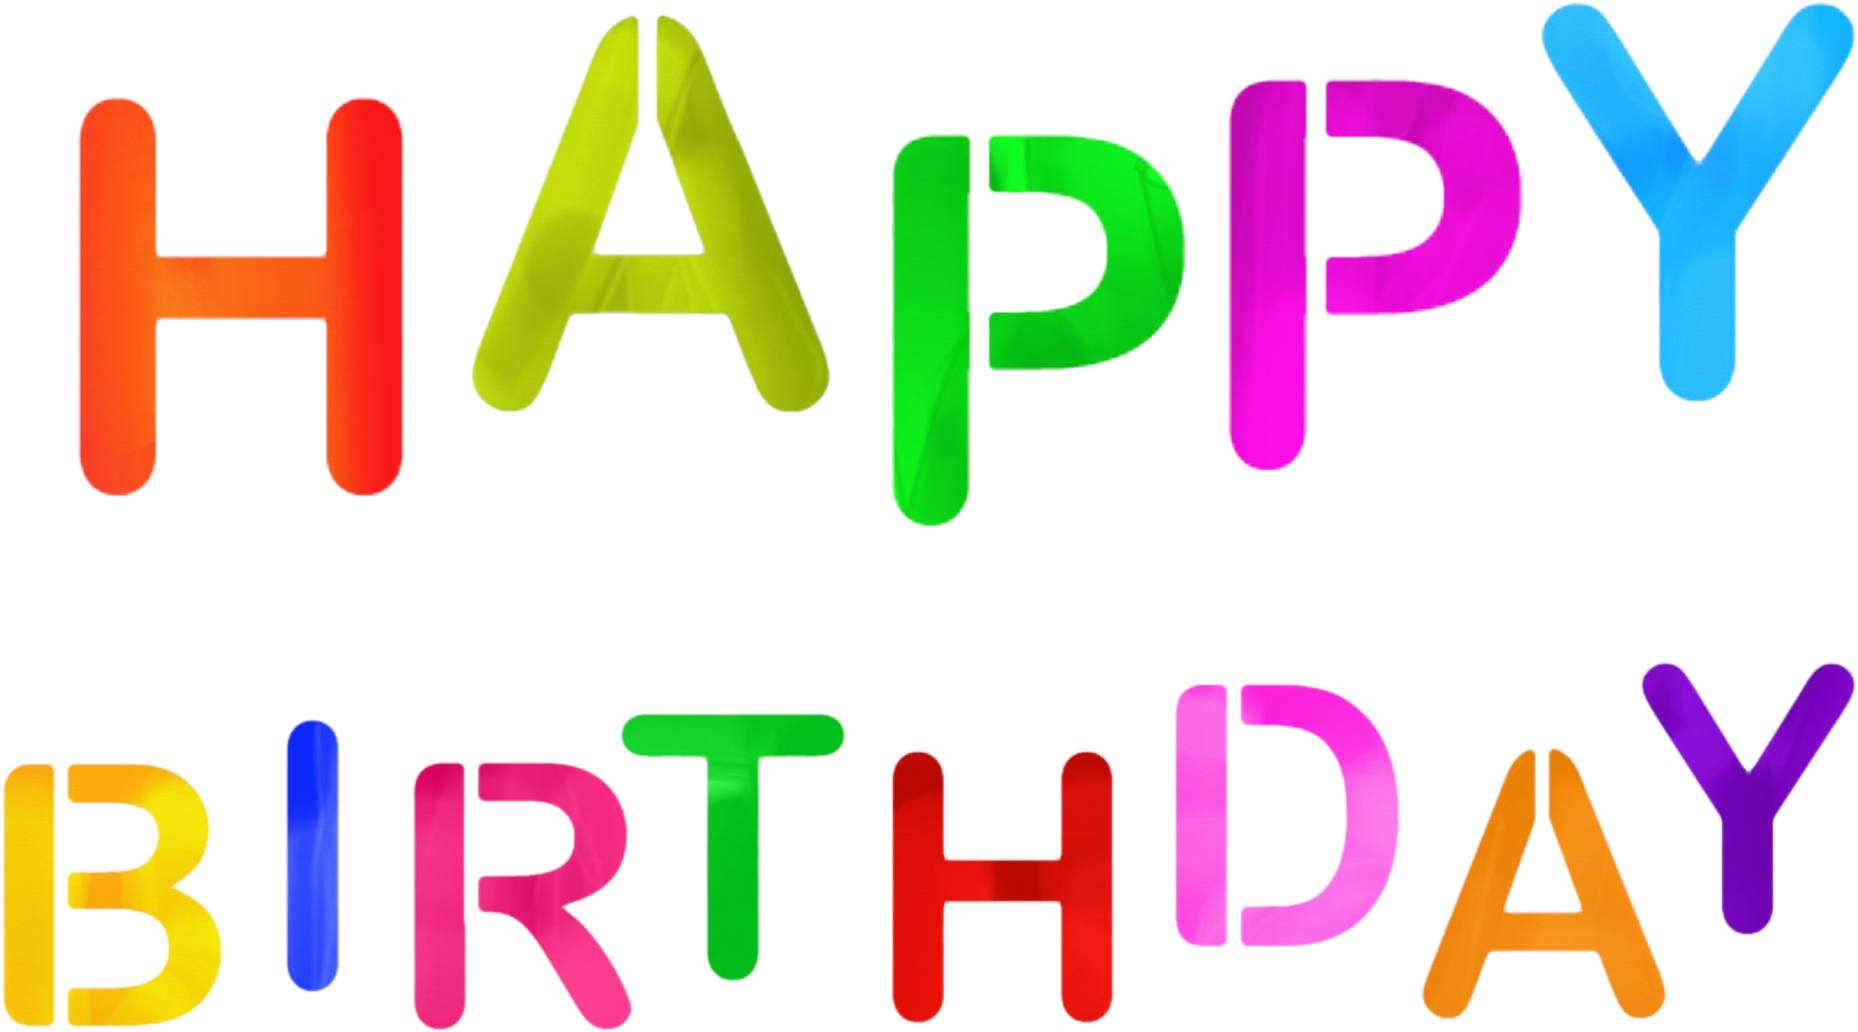 Happy Birthday PNG Cut Out Editing Material Download Here - VFX Download